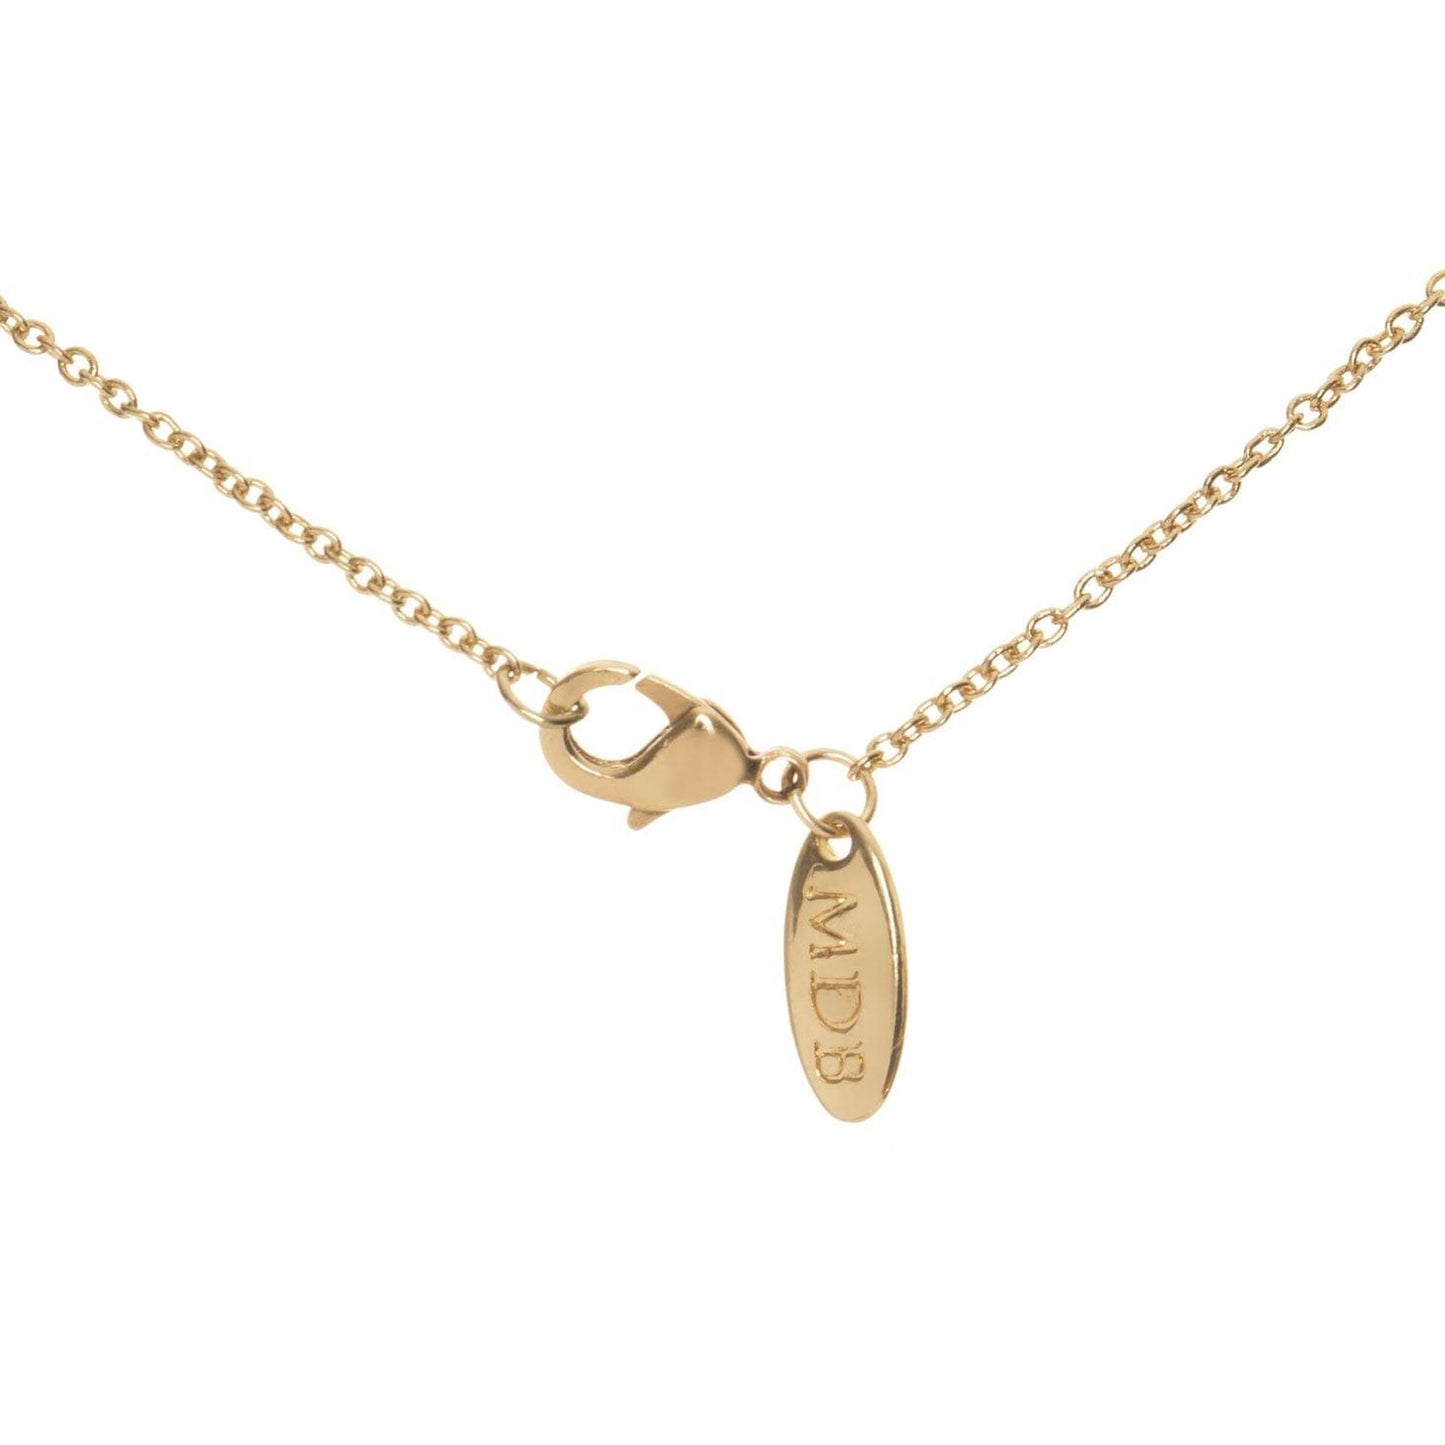 Lumiela Personalized Nameplate Riley Necklace in Gold Tone